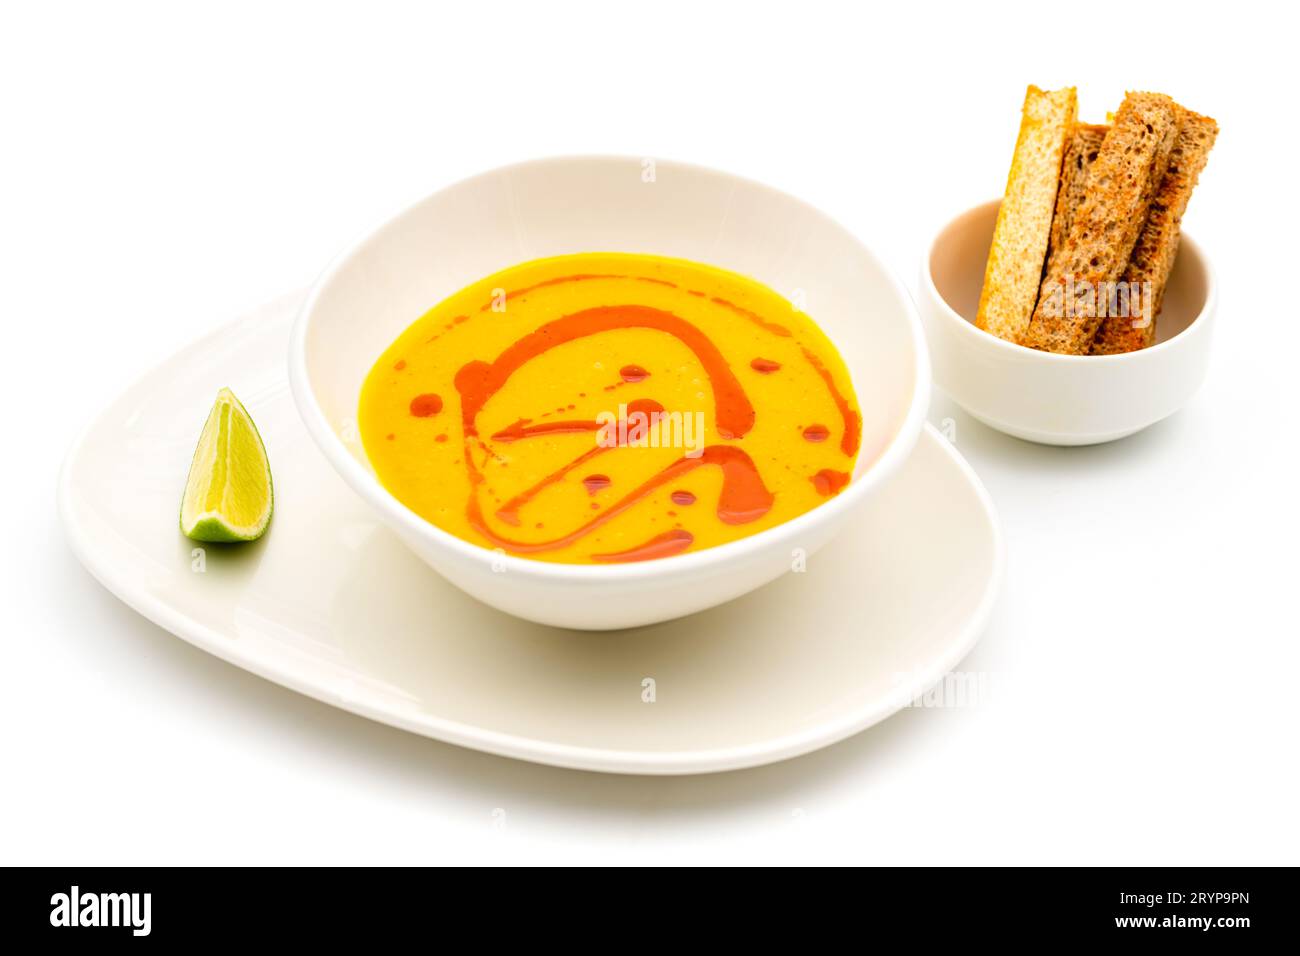 Strained lentil soup on a white porcelain plate Stock Photo